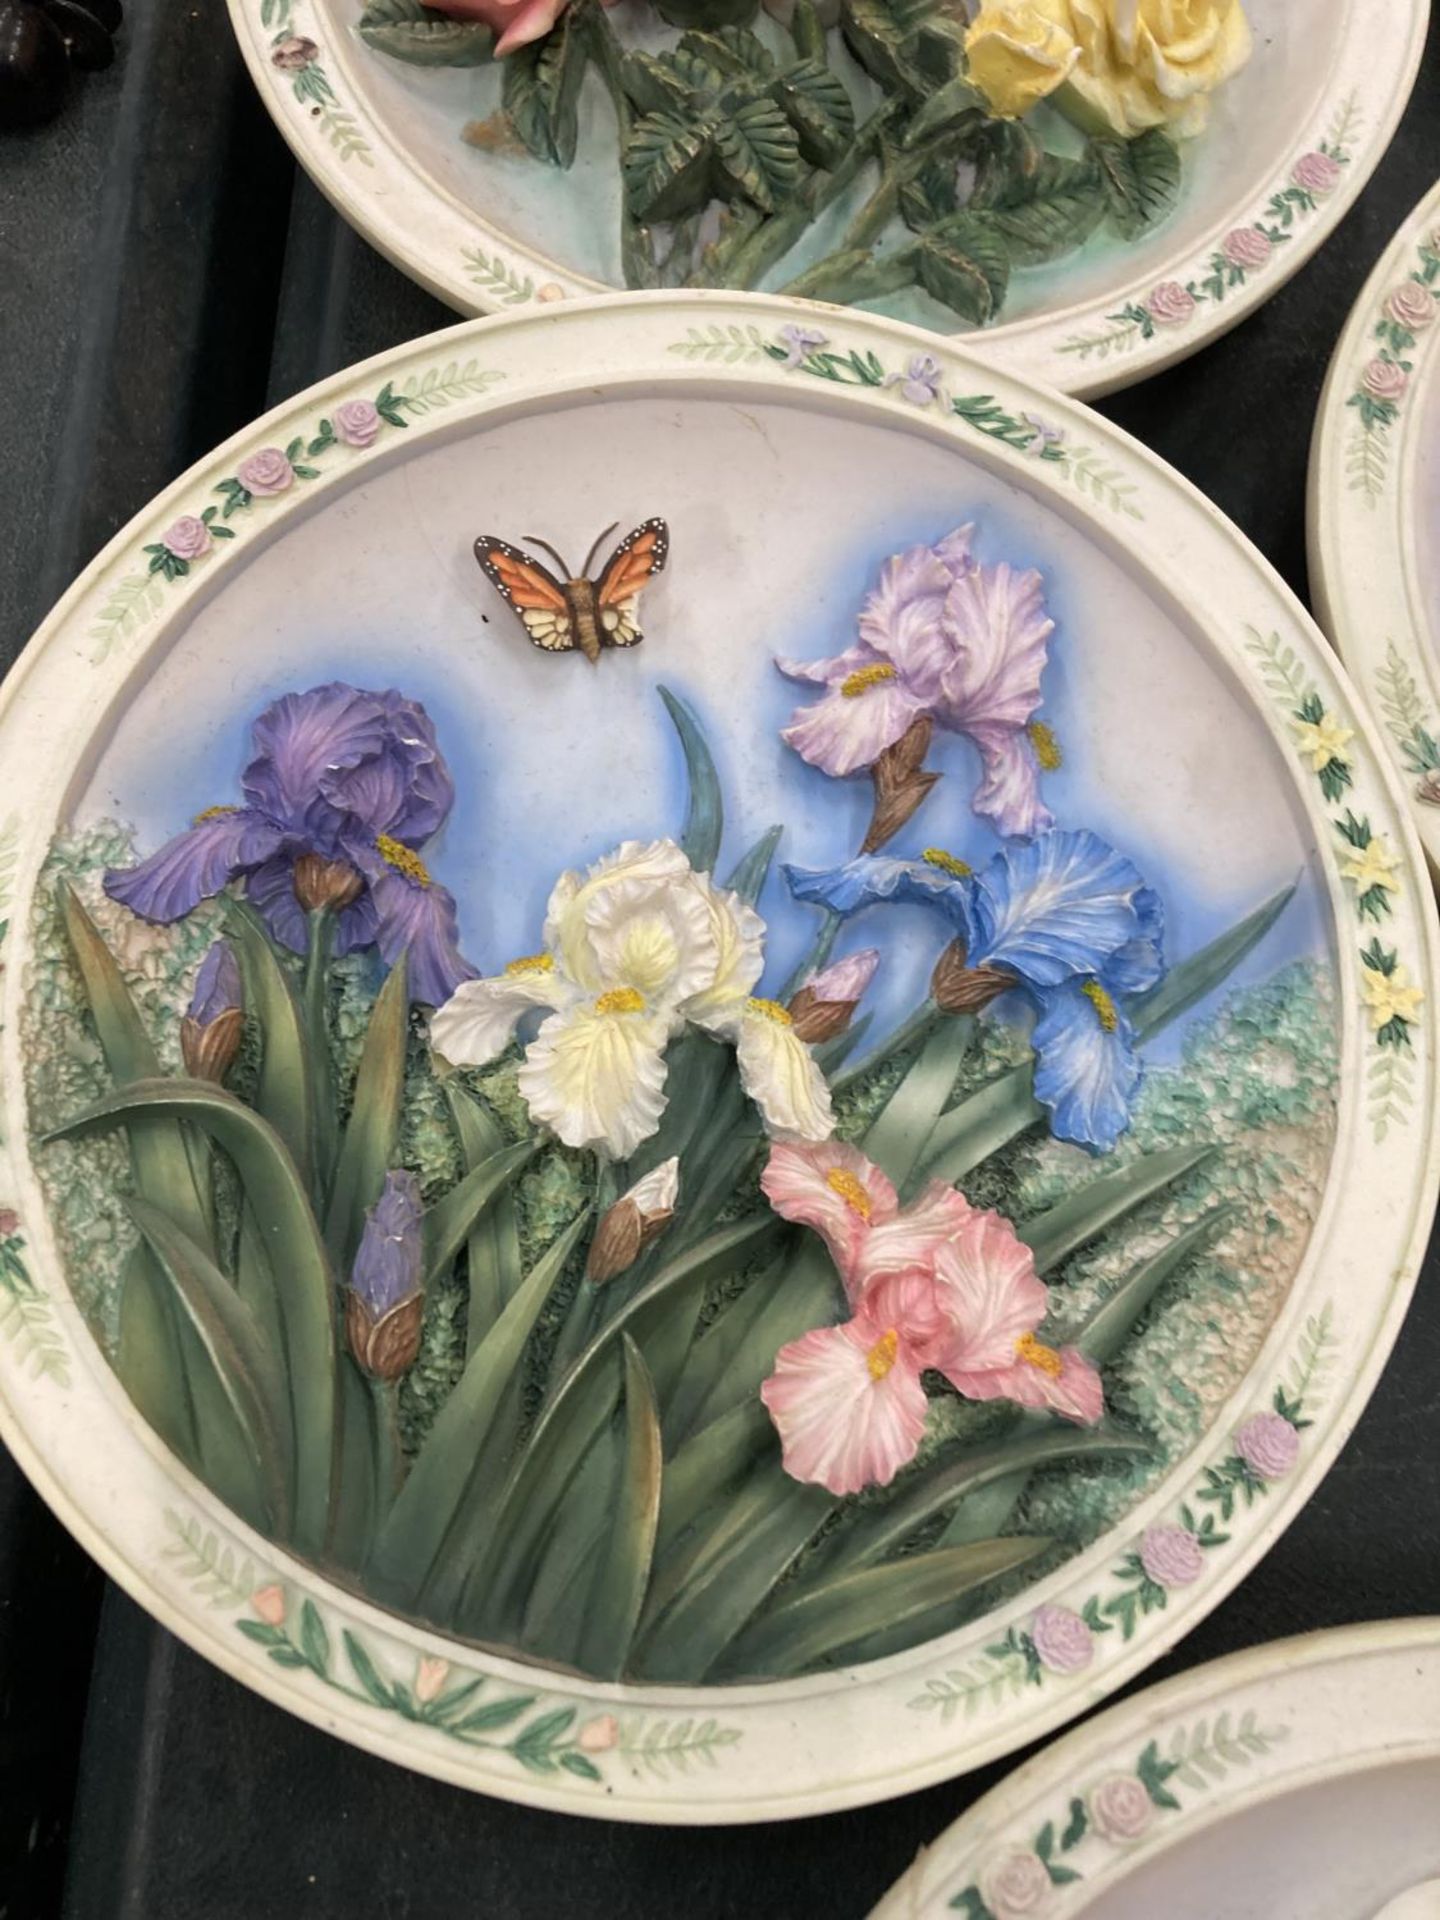 A COLLECTION OF LENA LIU 'BEAUTIFUL GARDENS' CABINET PLATES - 6 IN TOTAL, SOME A/F - Image 3 of 7